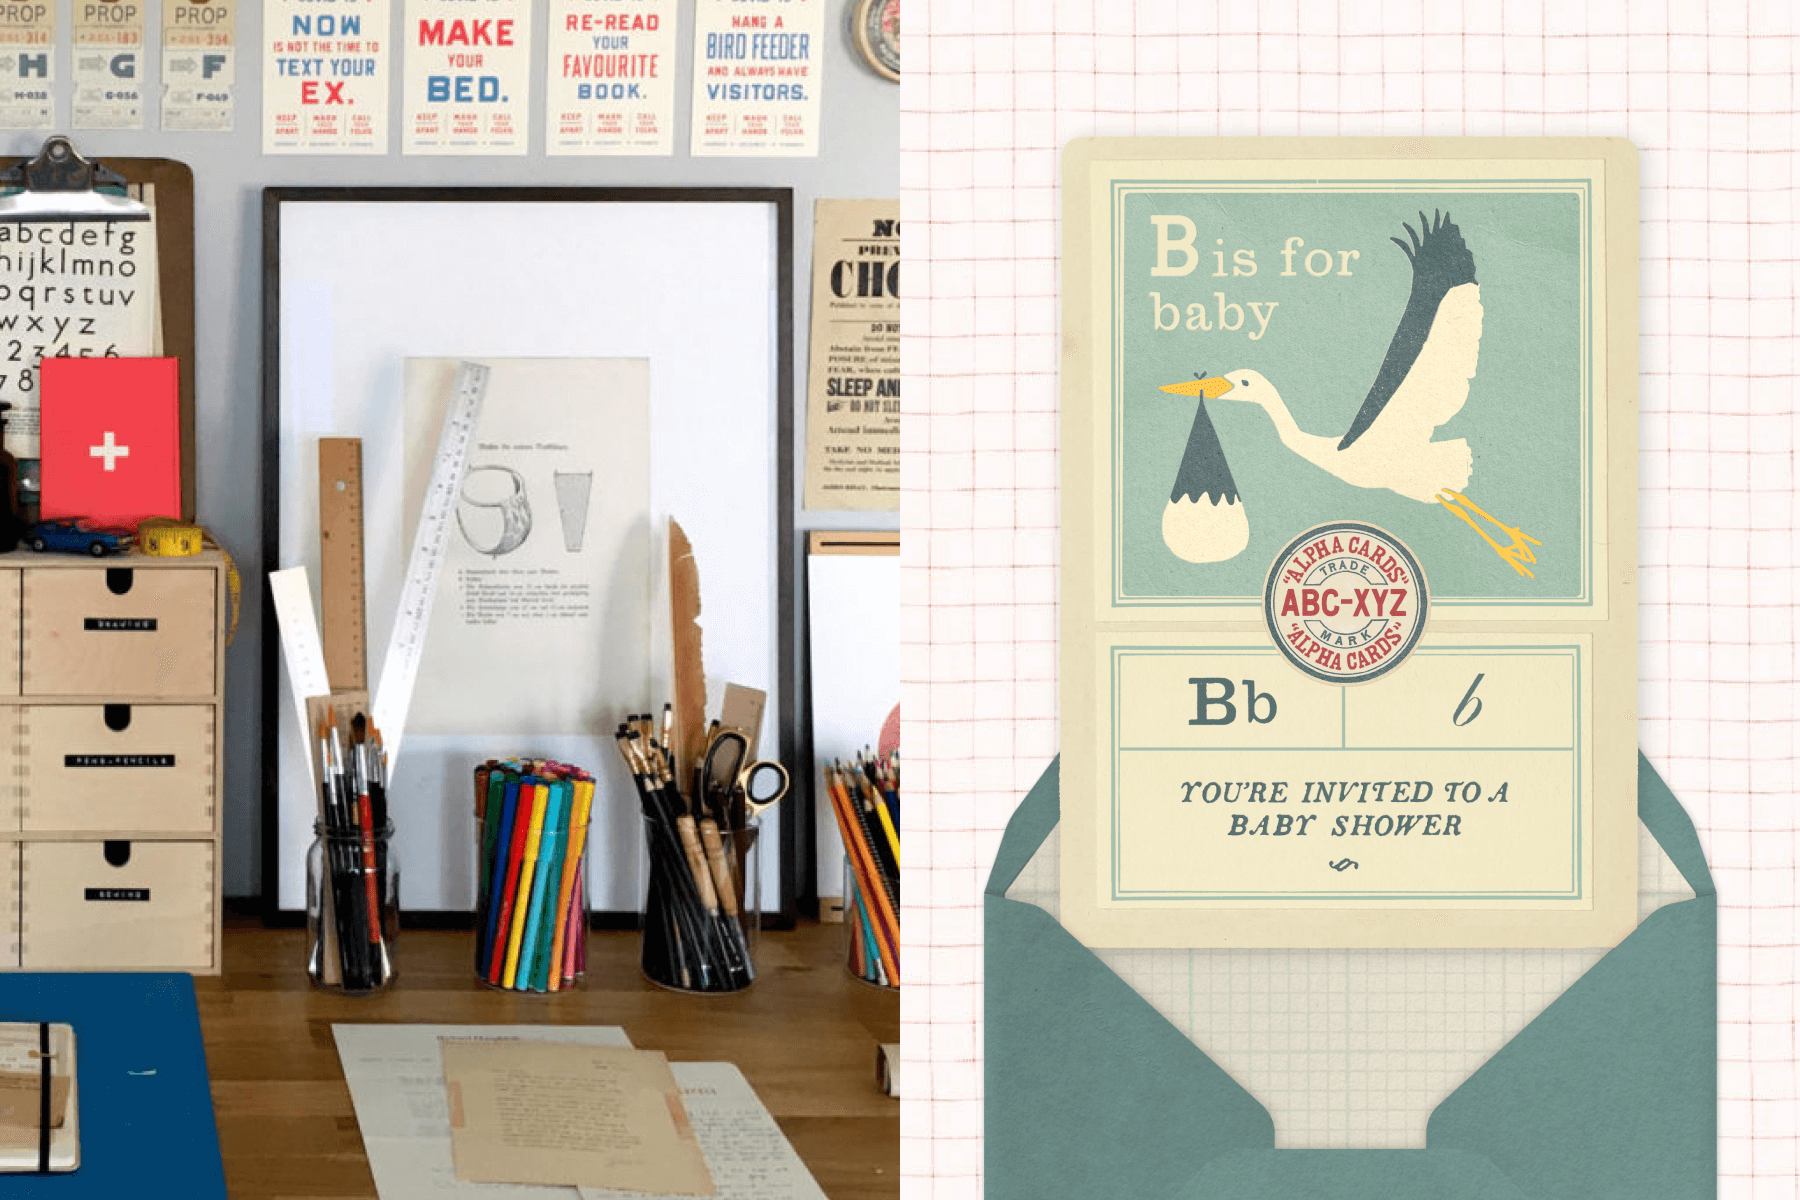 Left; A picture of Annie’s work Room with old pieces of paper and various glass jars holding her paintbrushes, colorful pens and pencils. Right; A cream and muted sea blue invitation with an illustration of a stork carrying a baby, in front of a gridded light red background.